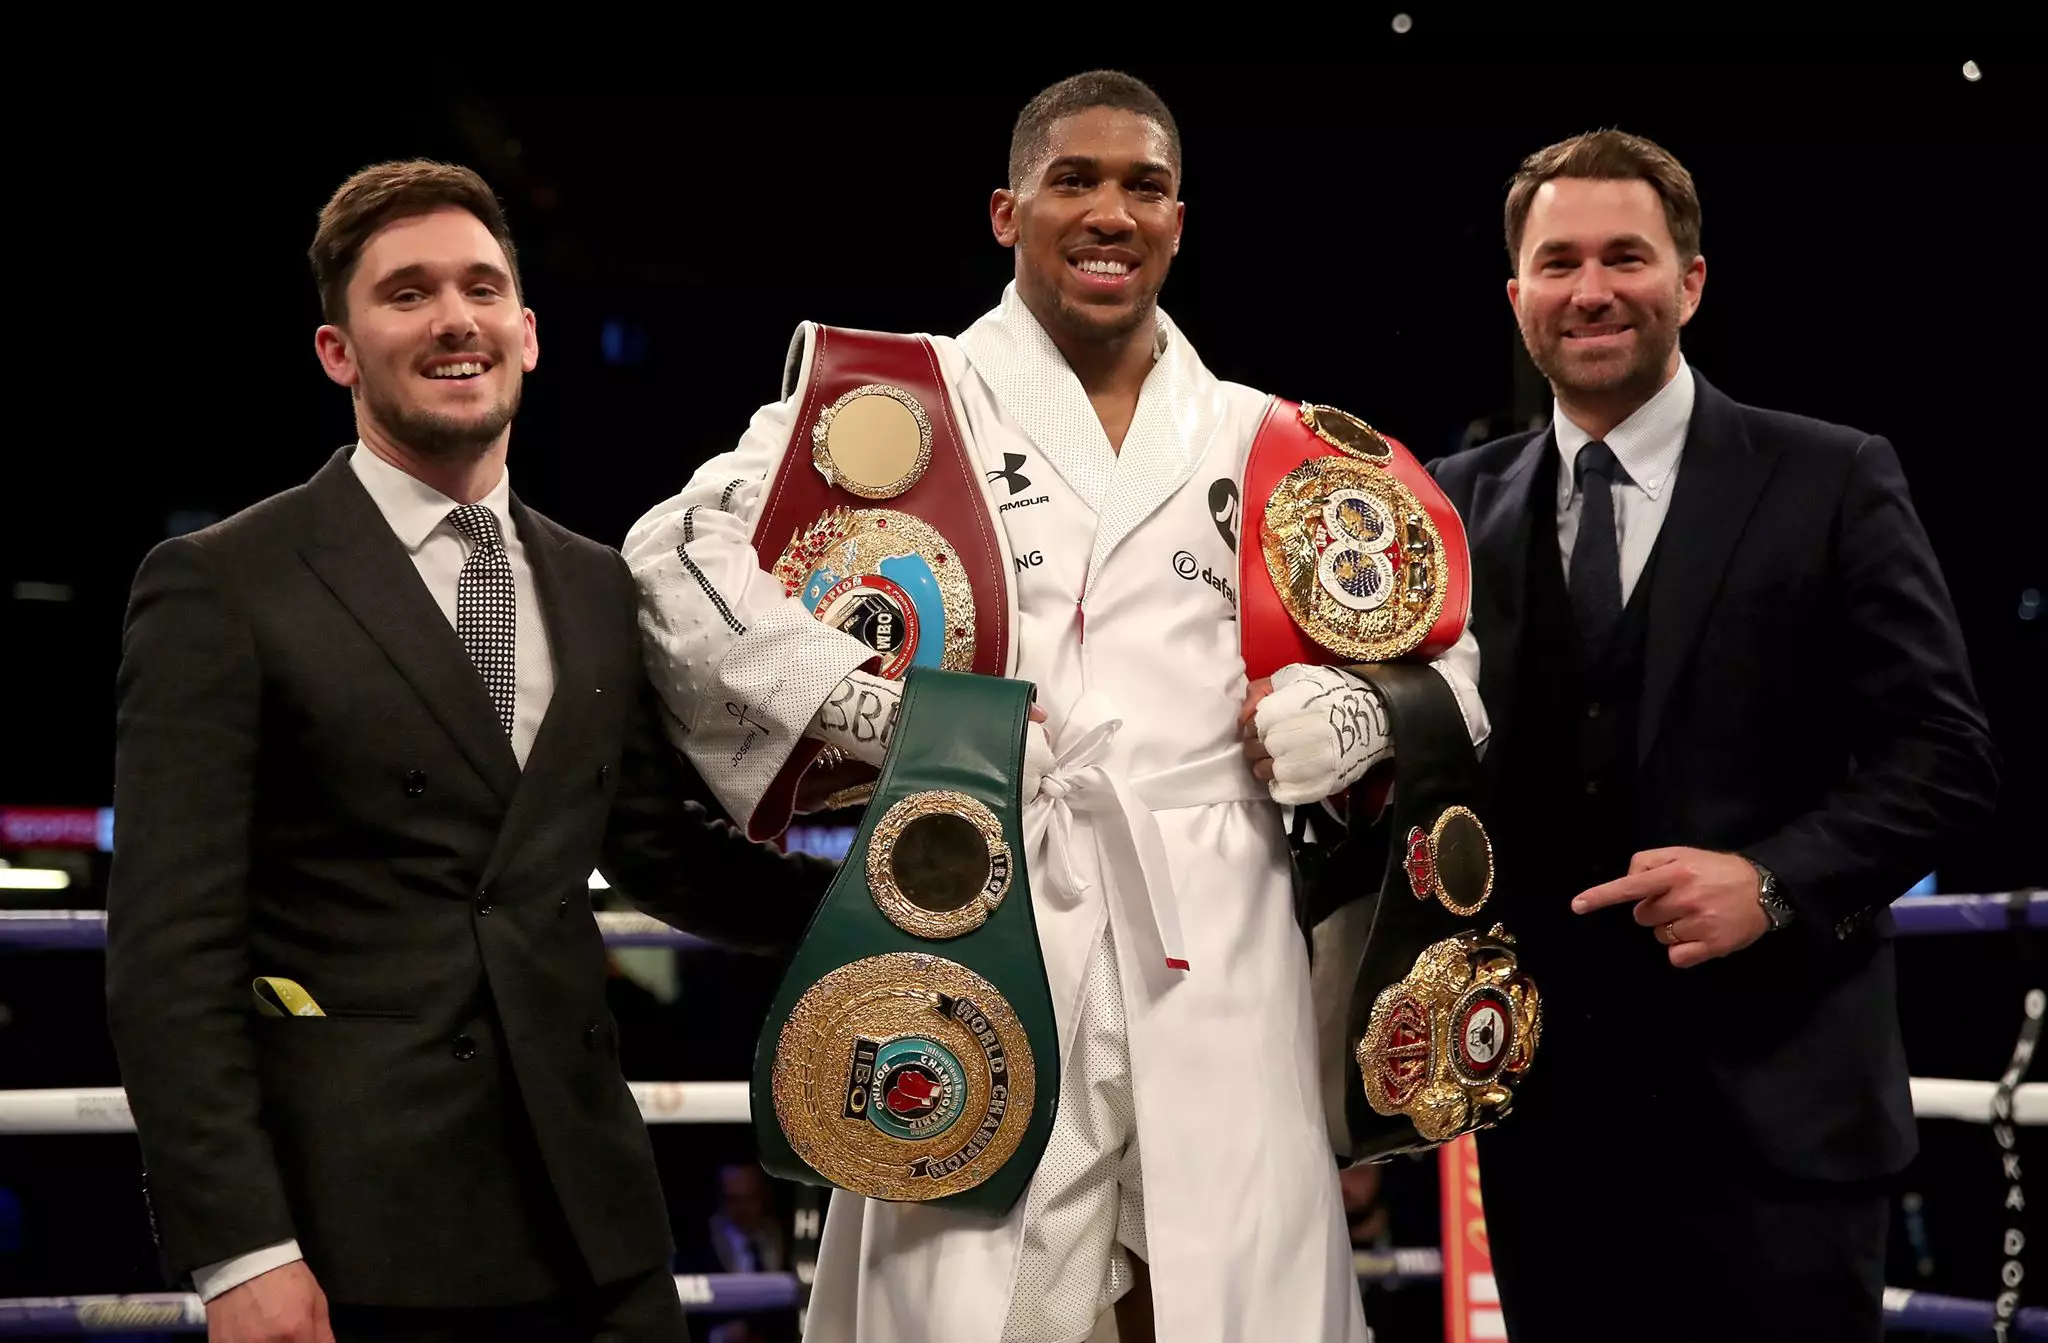 Joshua with Hearn after his fight. Image: PA